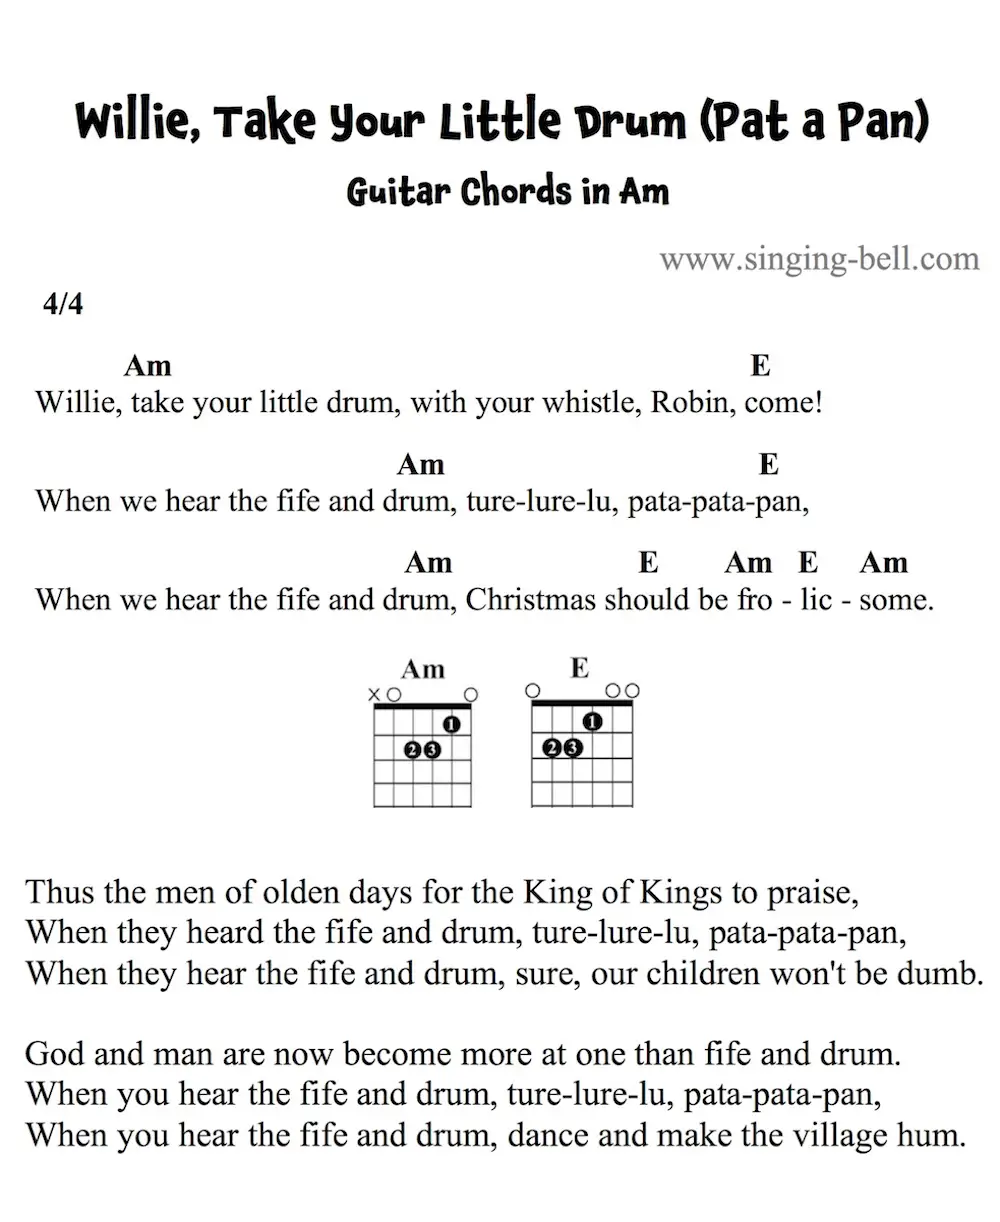 Willie, Take Your Little Drum (Pat a Pan) Guitar Chords and Tabs in Am.